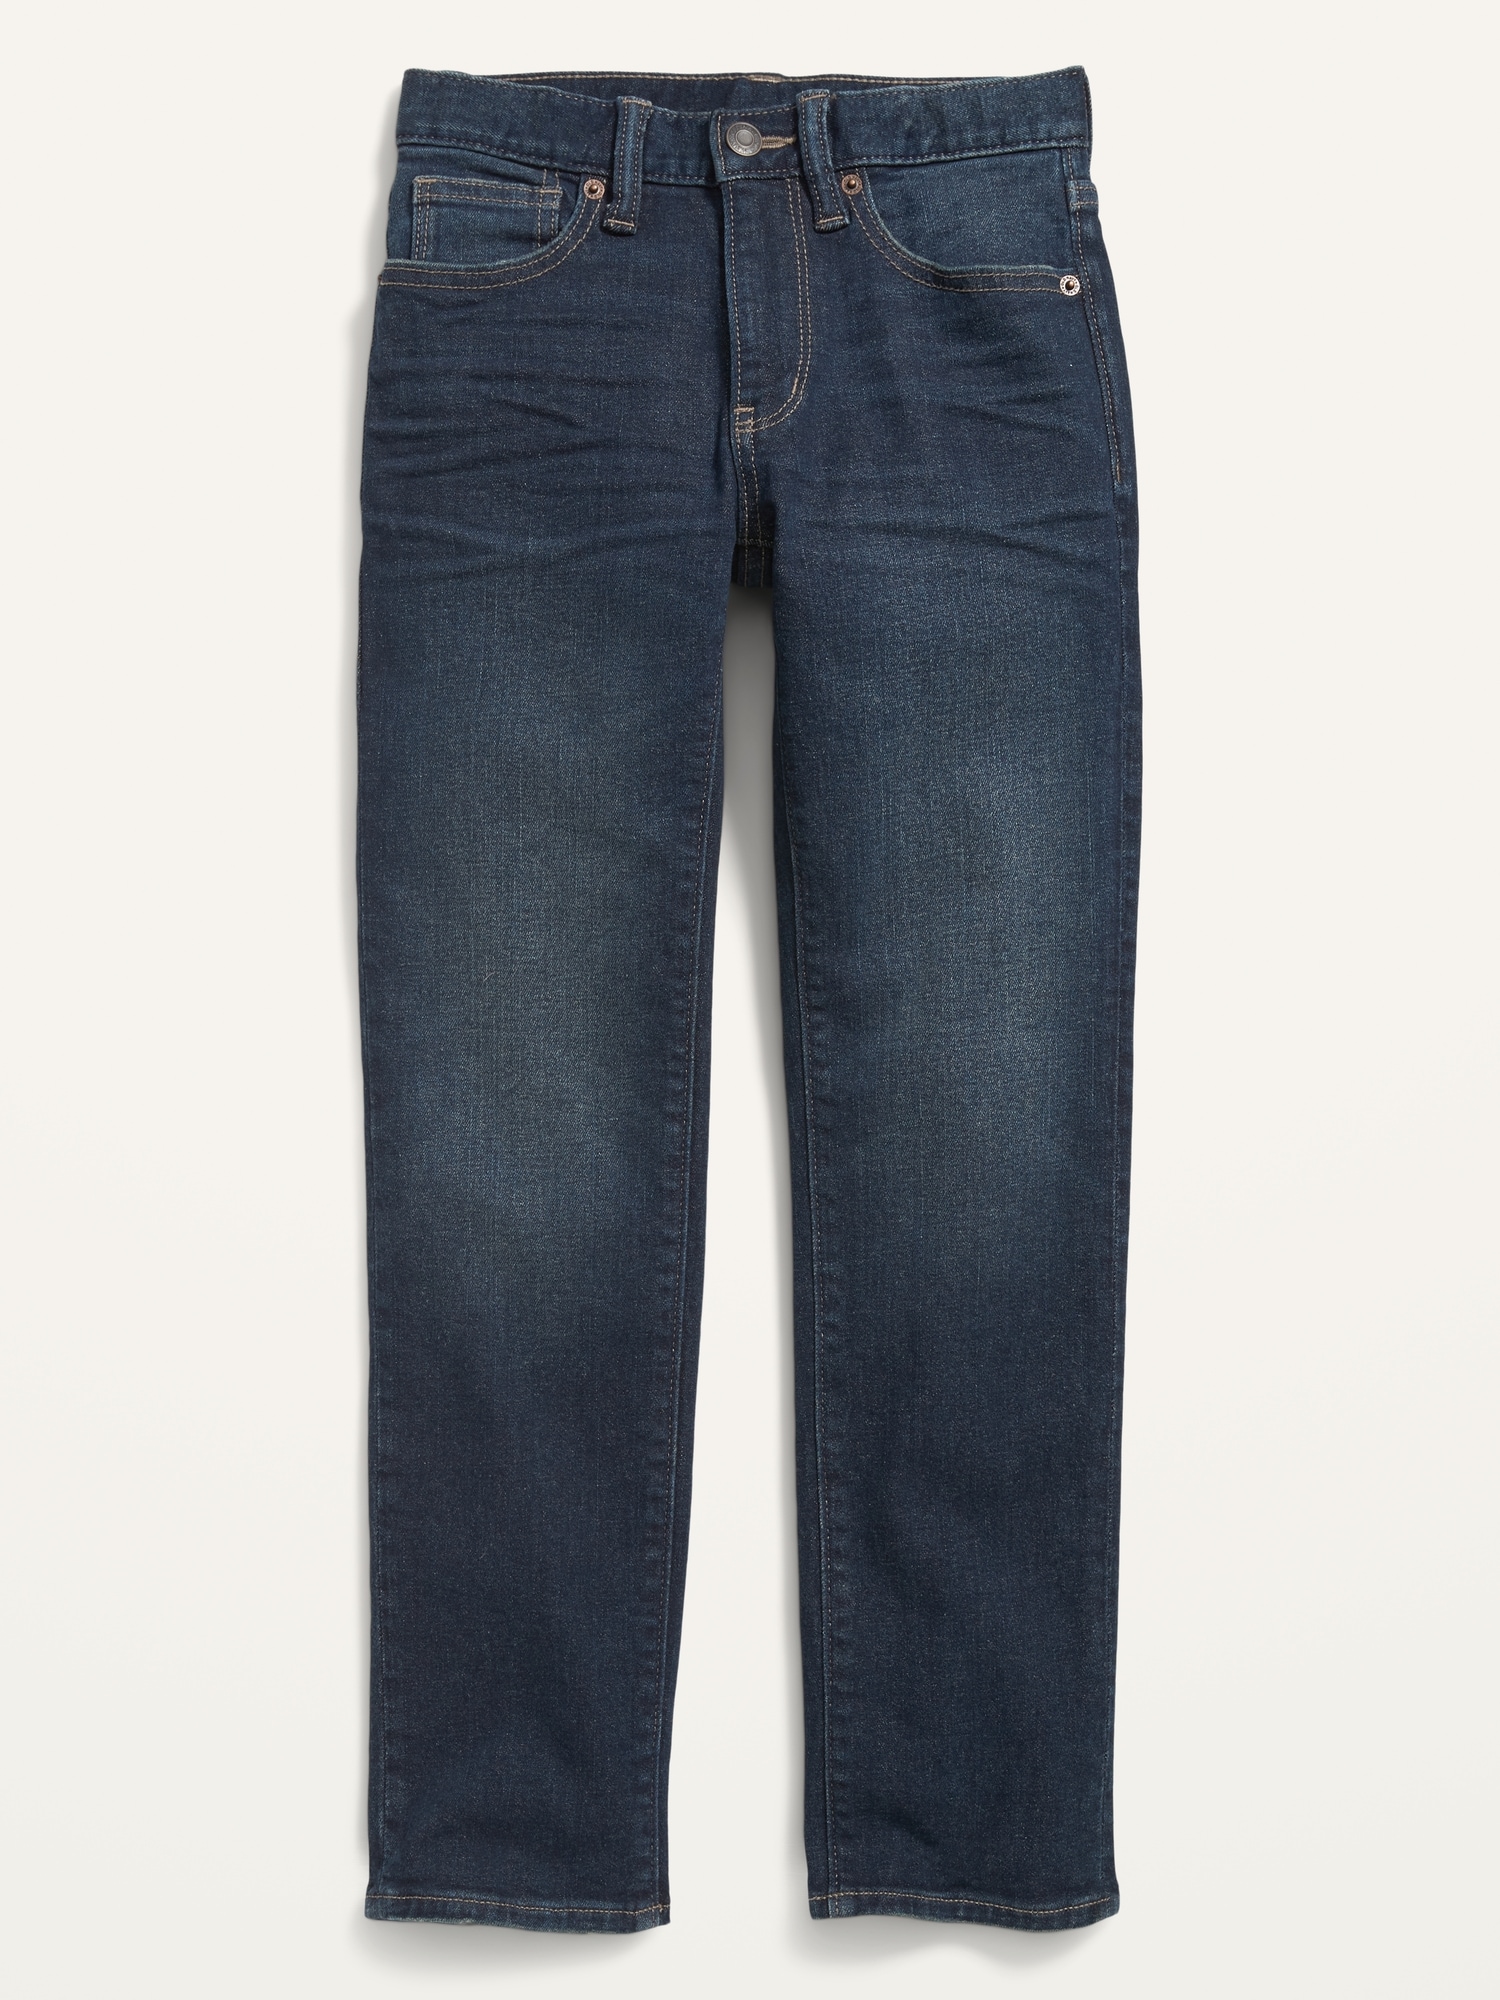 Skinny Jeans for | Boys Old Navy